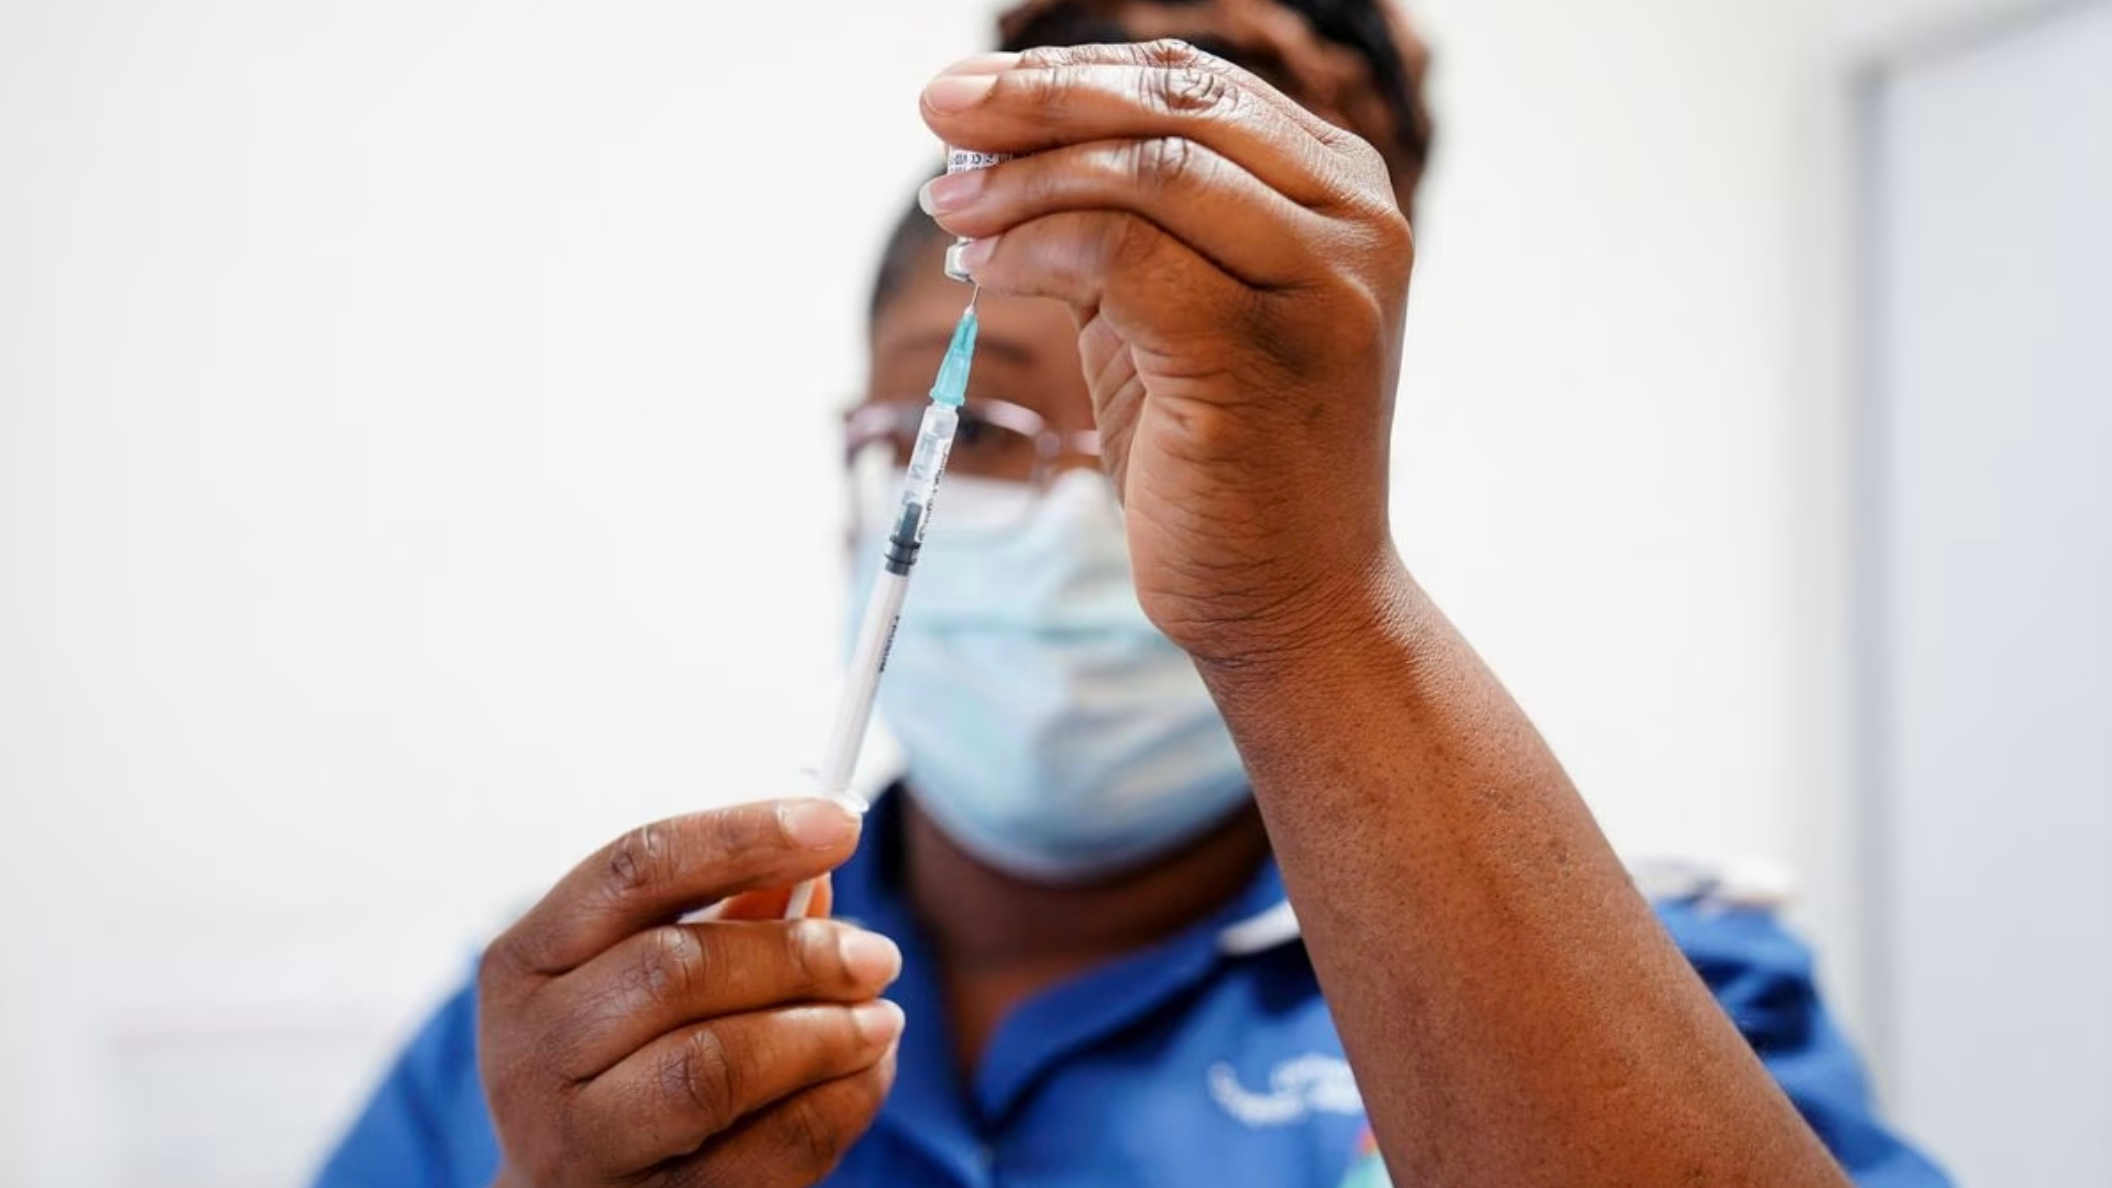 A nurse prepares a dose of a COVID-19 vaccine at the University Hospital Coventry, Britain, April 22, 2022. /Reuters